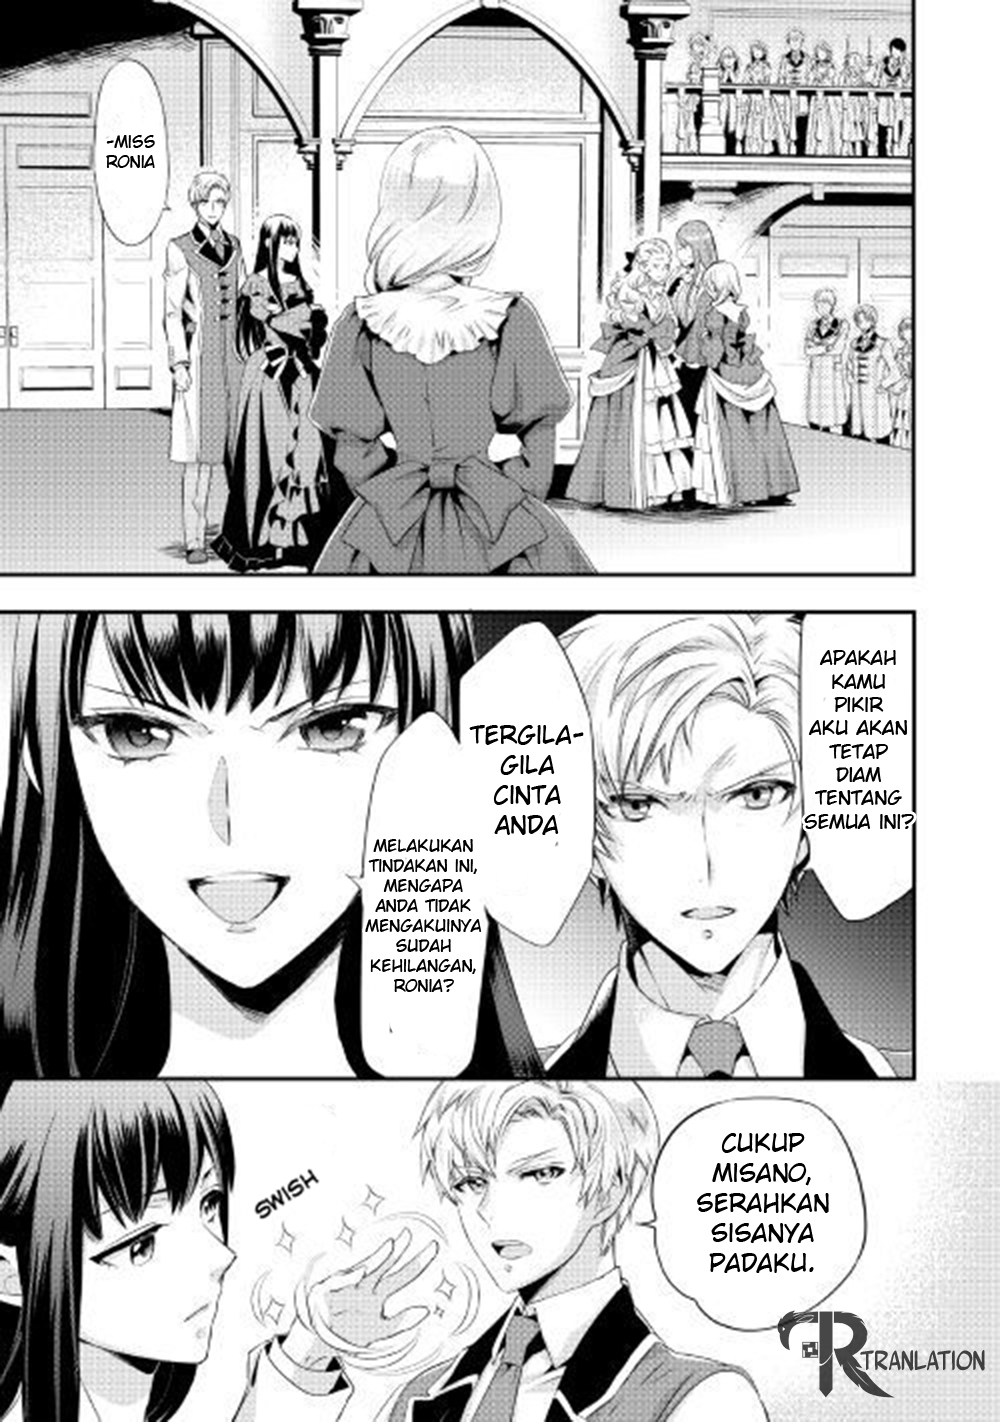 Milady Just Wants to Relax Chapter 01 14